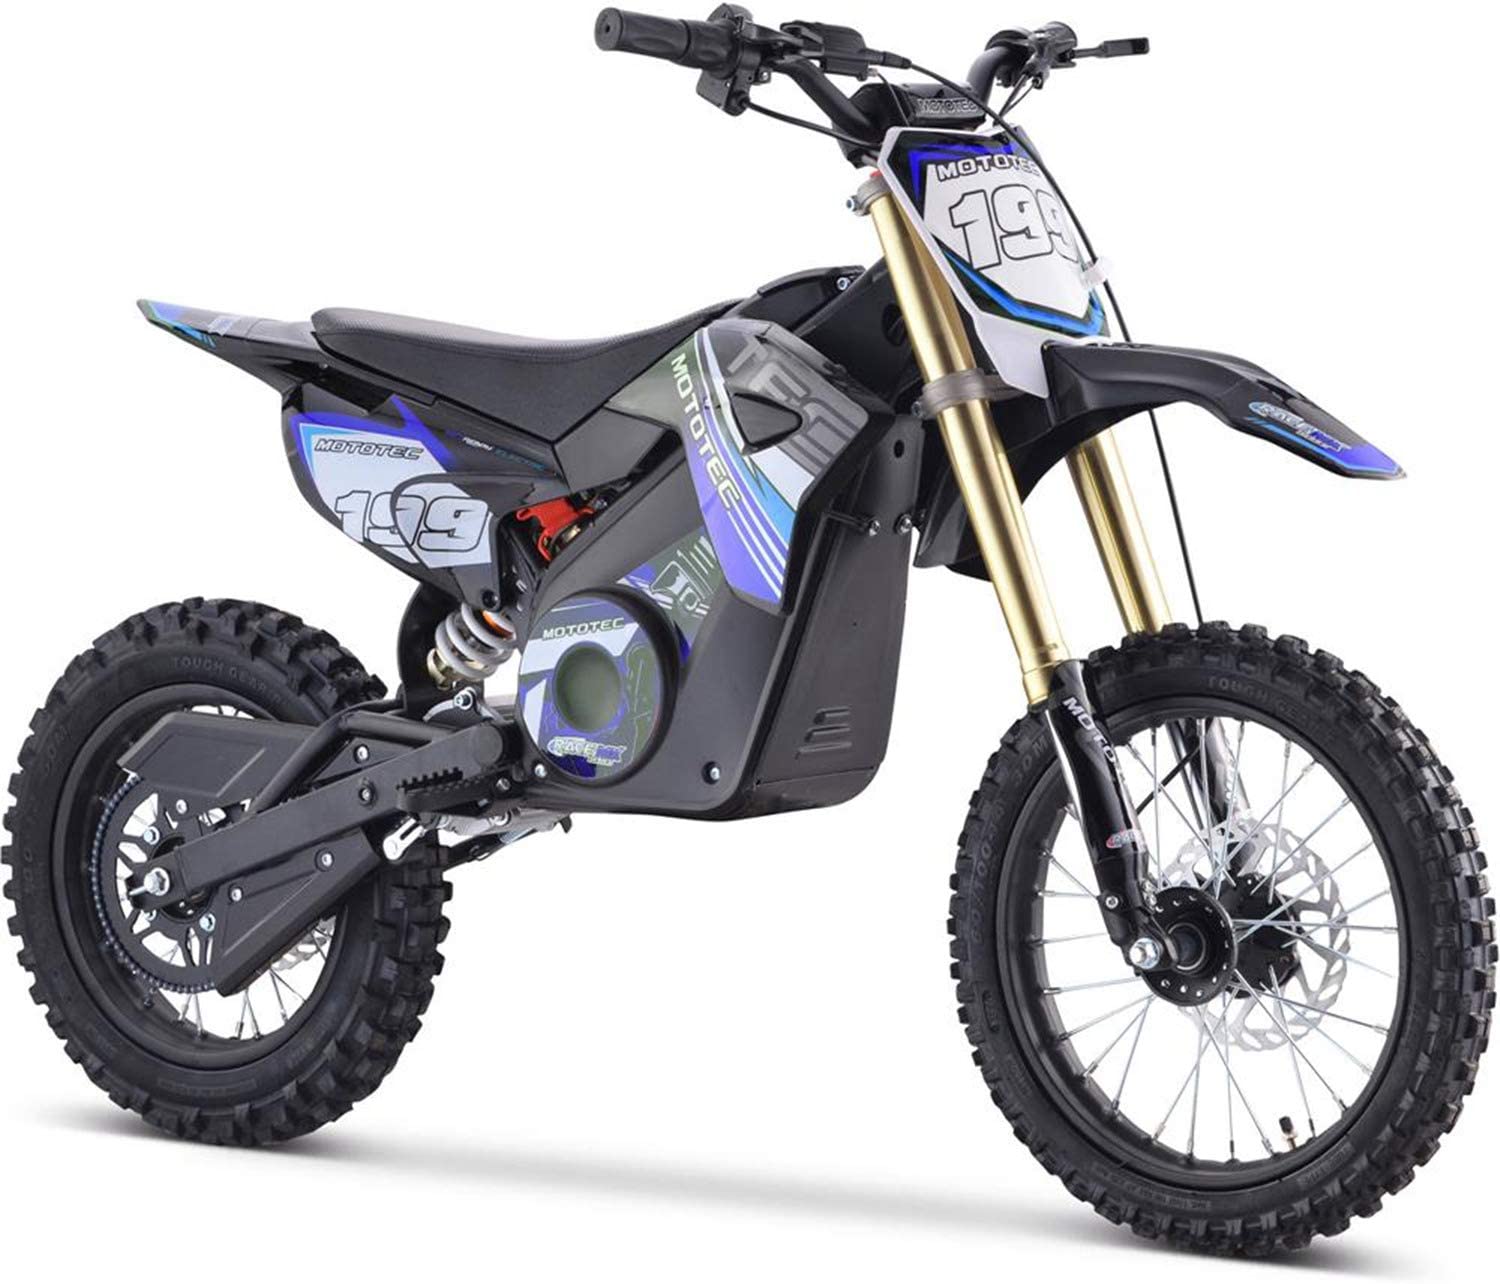 Which is the Best Electric Dirt Bike Under $500?